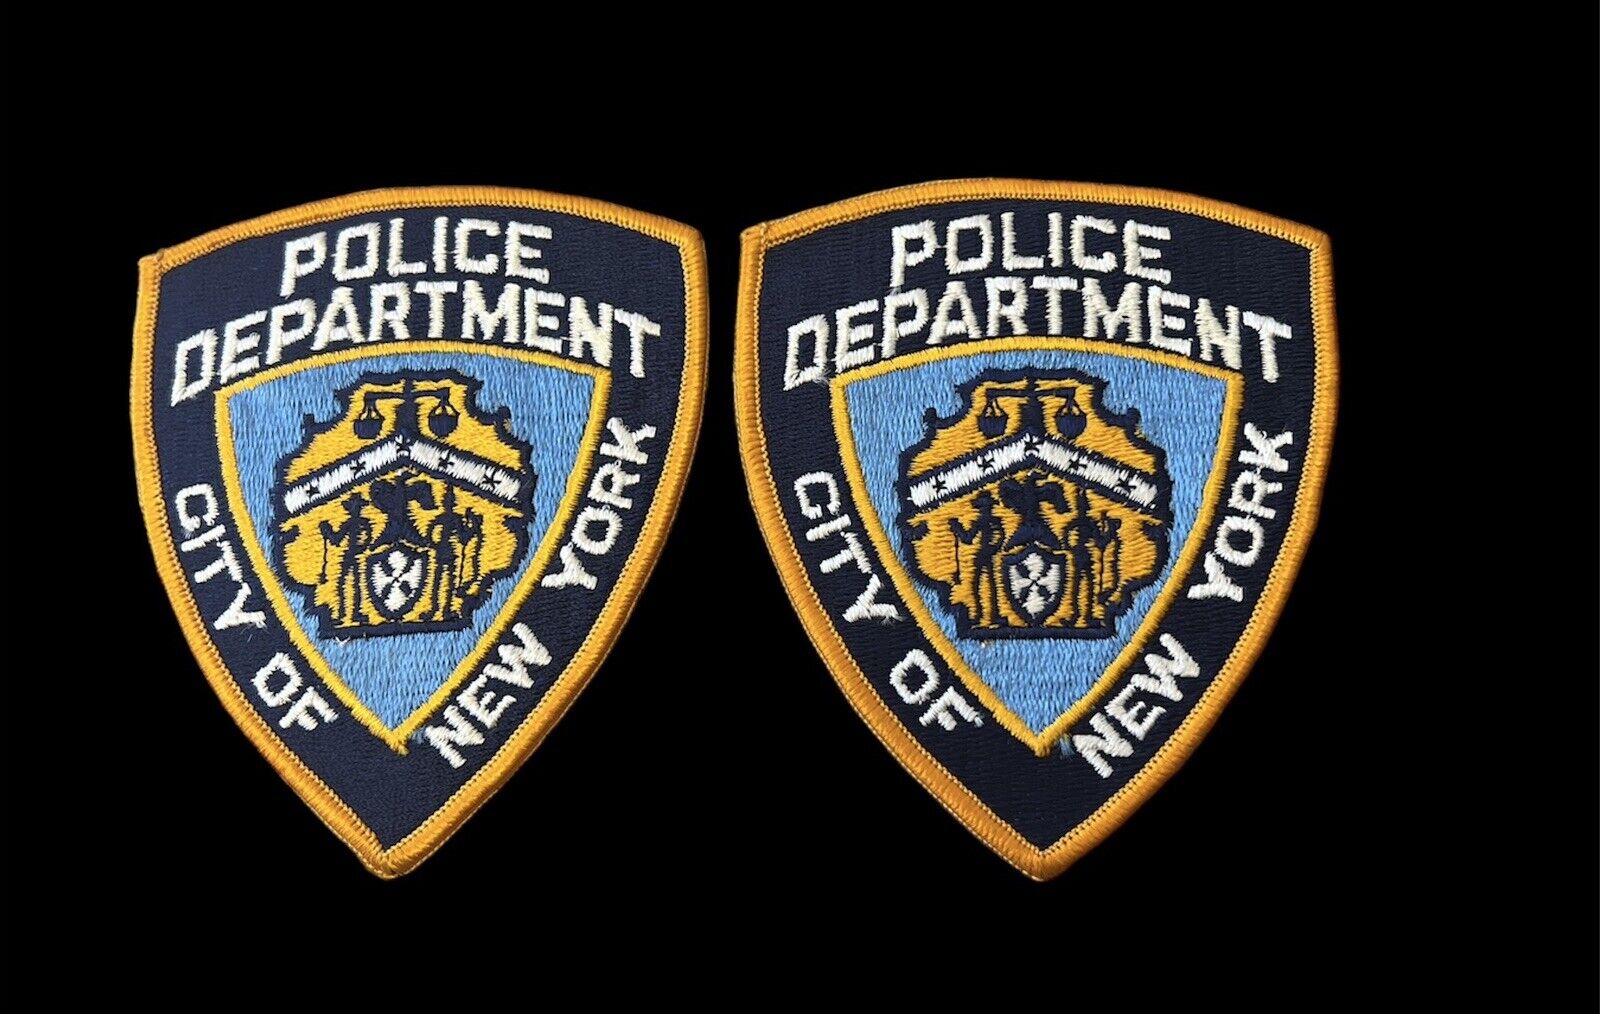 Lot Of 2 City Of New York Police Department Shoulder Patches Iron On